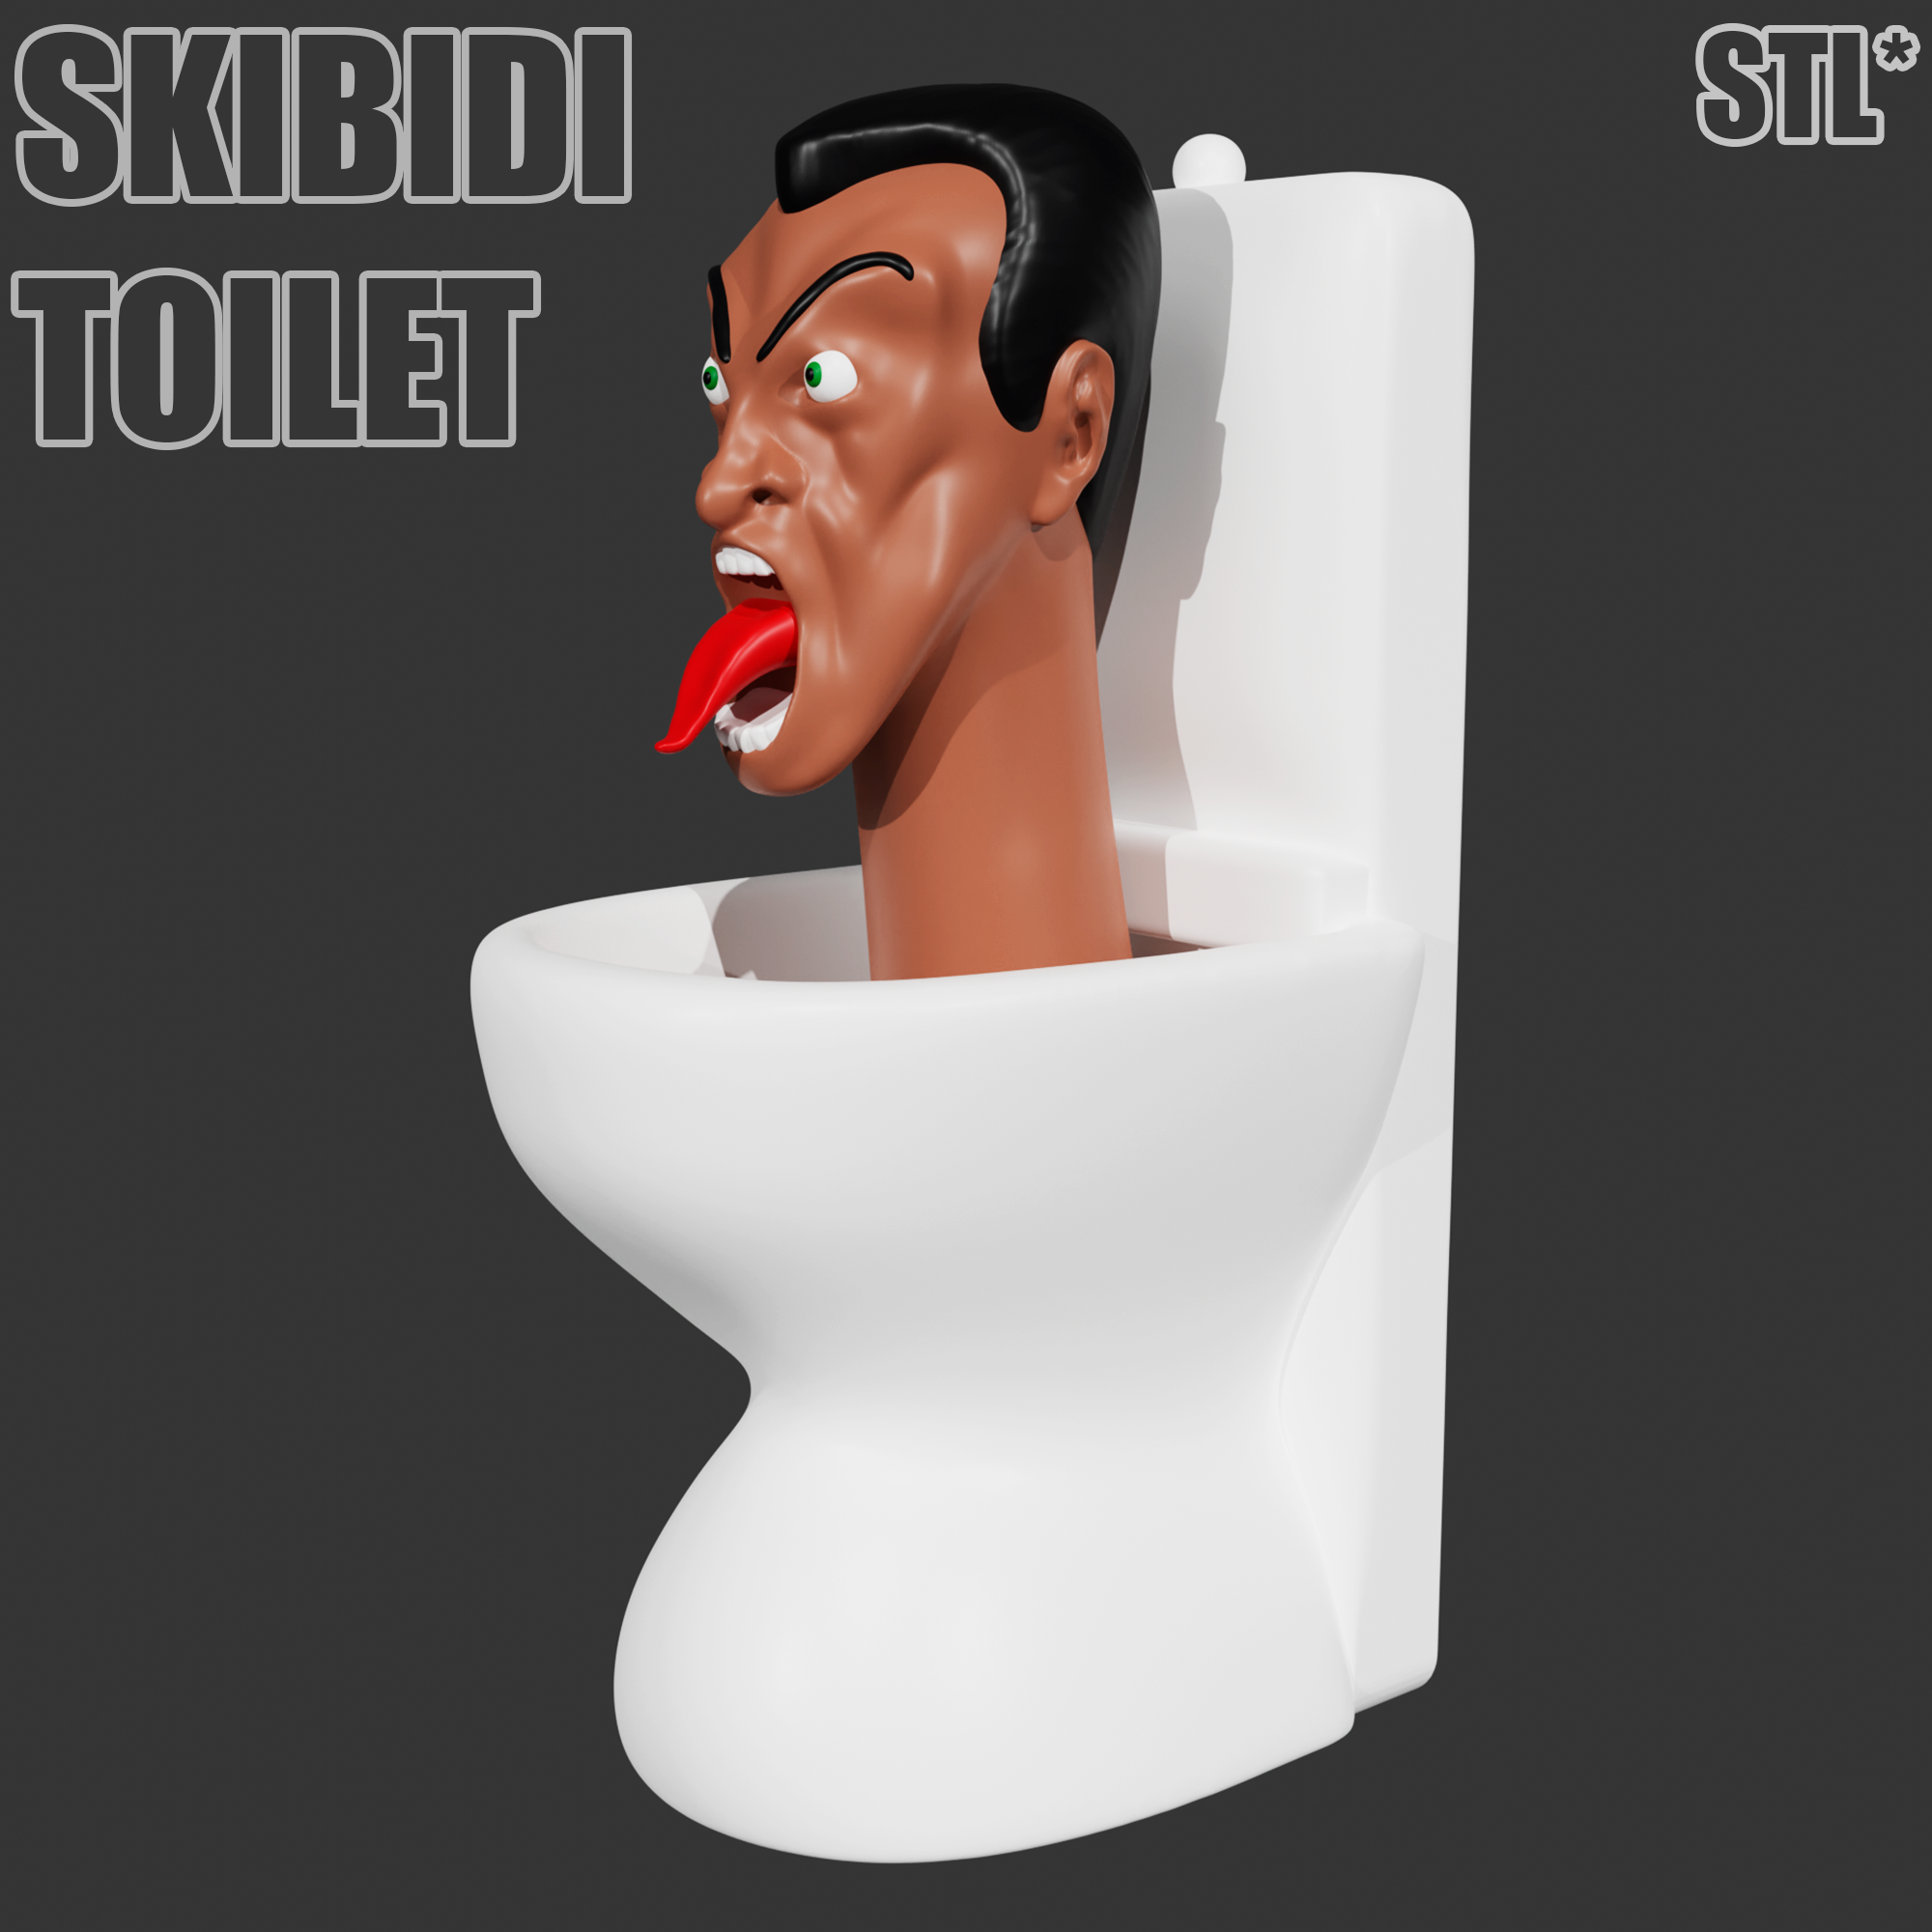 G man toilet is attacking you who will protect you : r/skibiditoilet